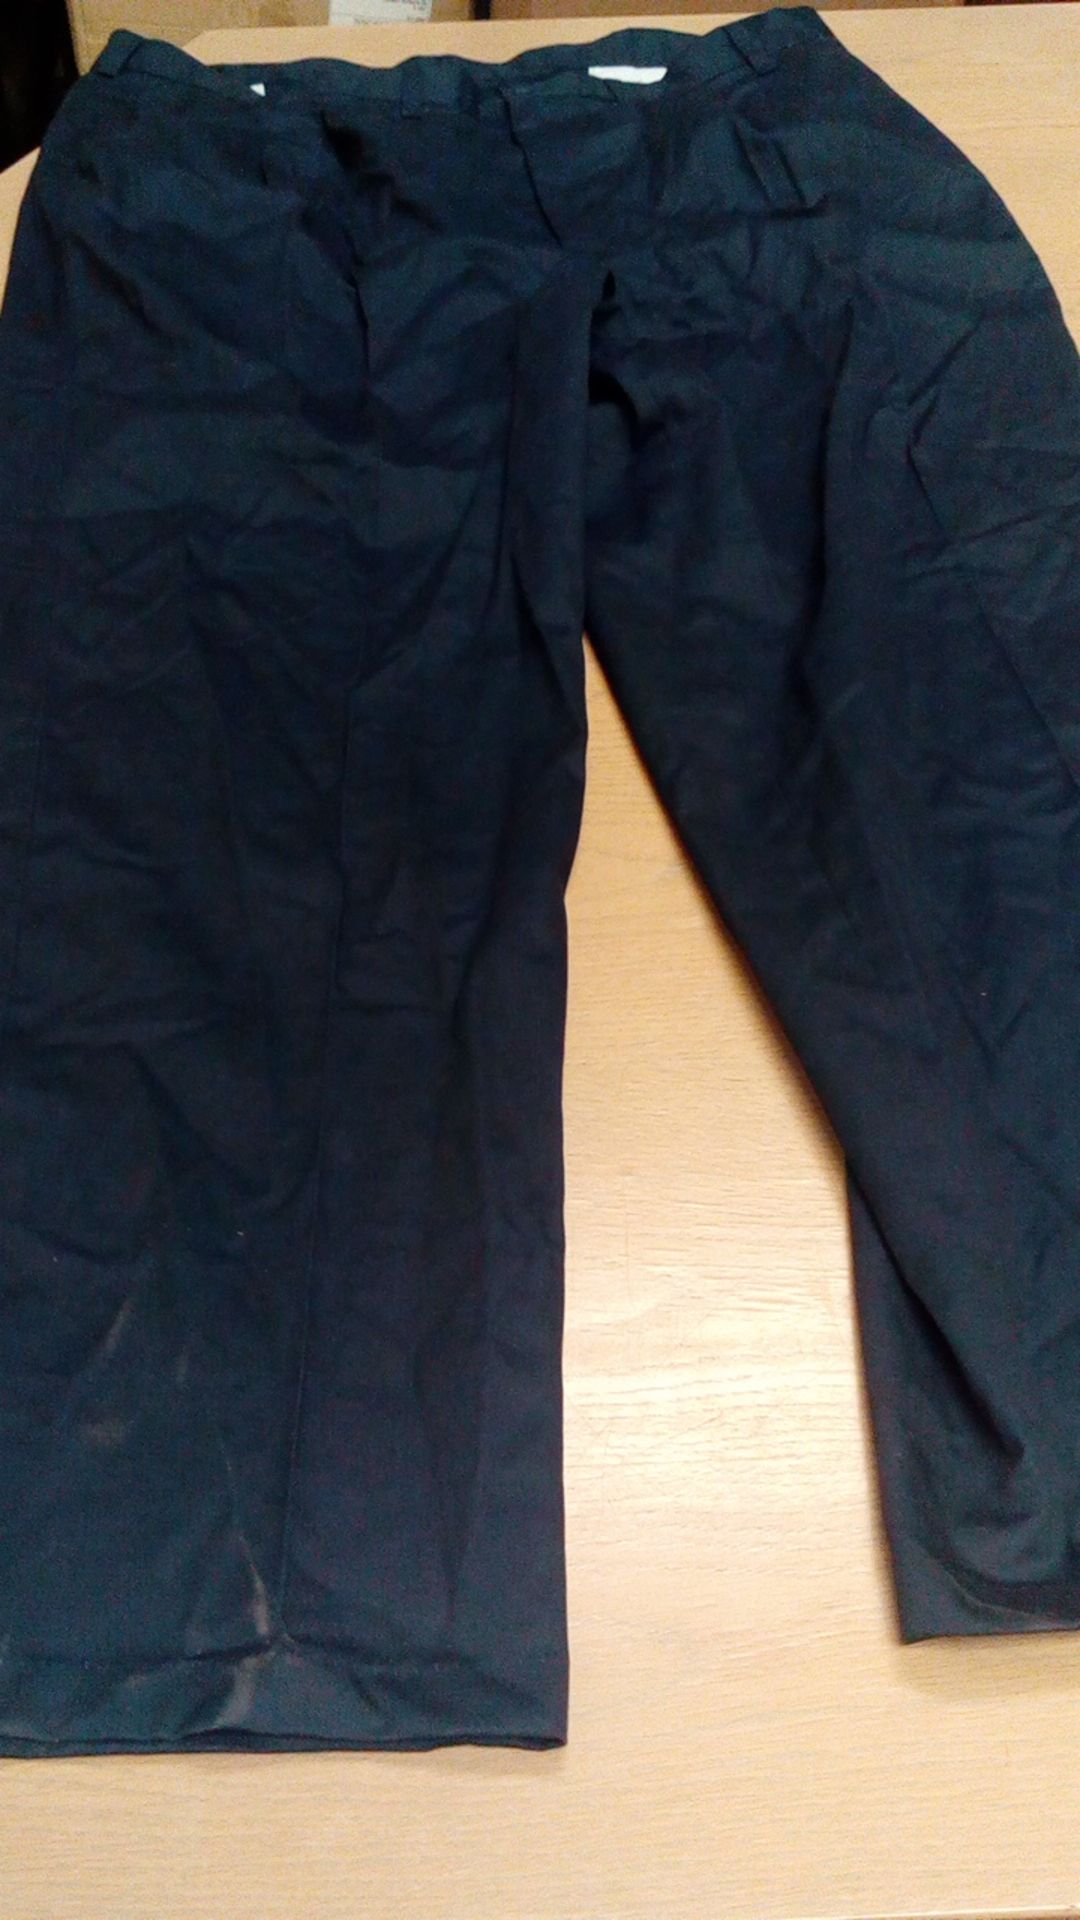 Alexandra workwear size 30 inch mens navy work trousers Alexandra workwear new and unused, these